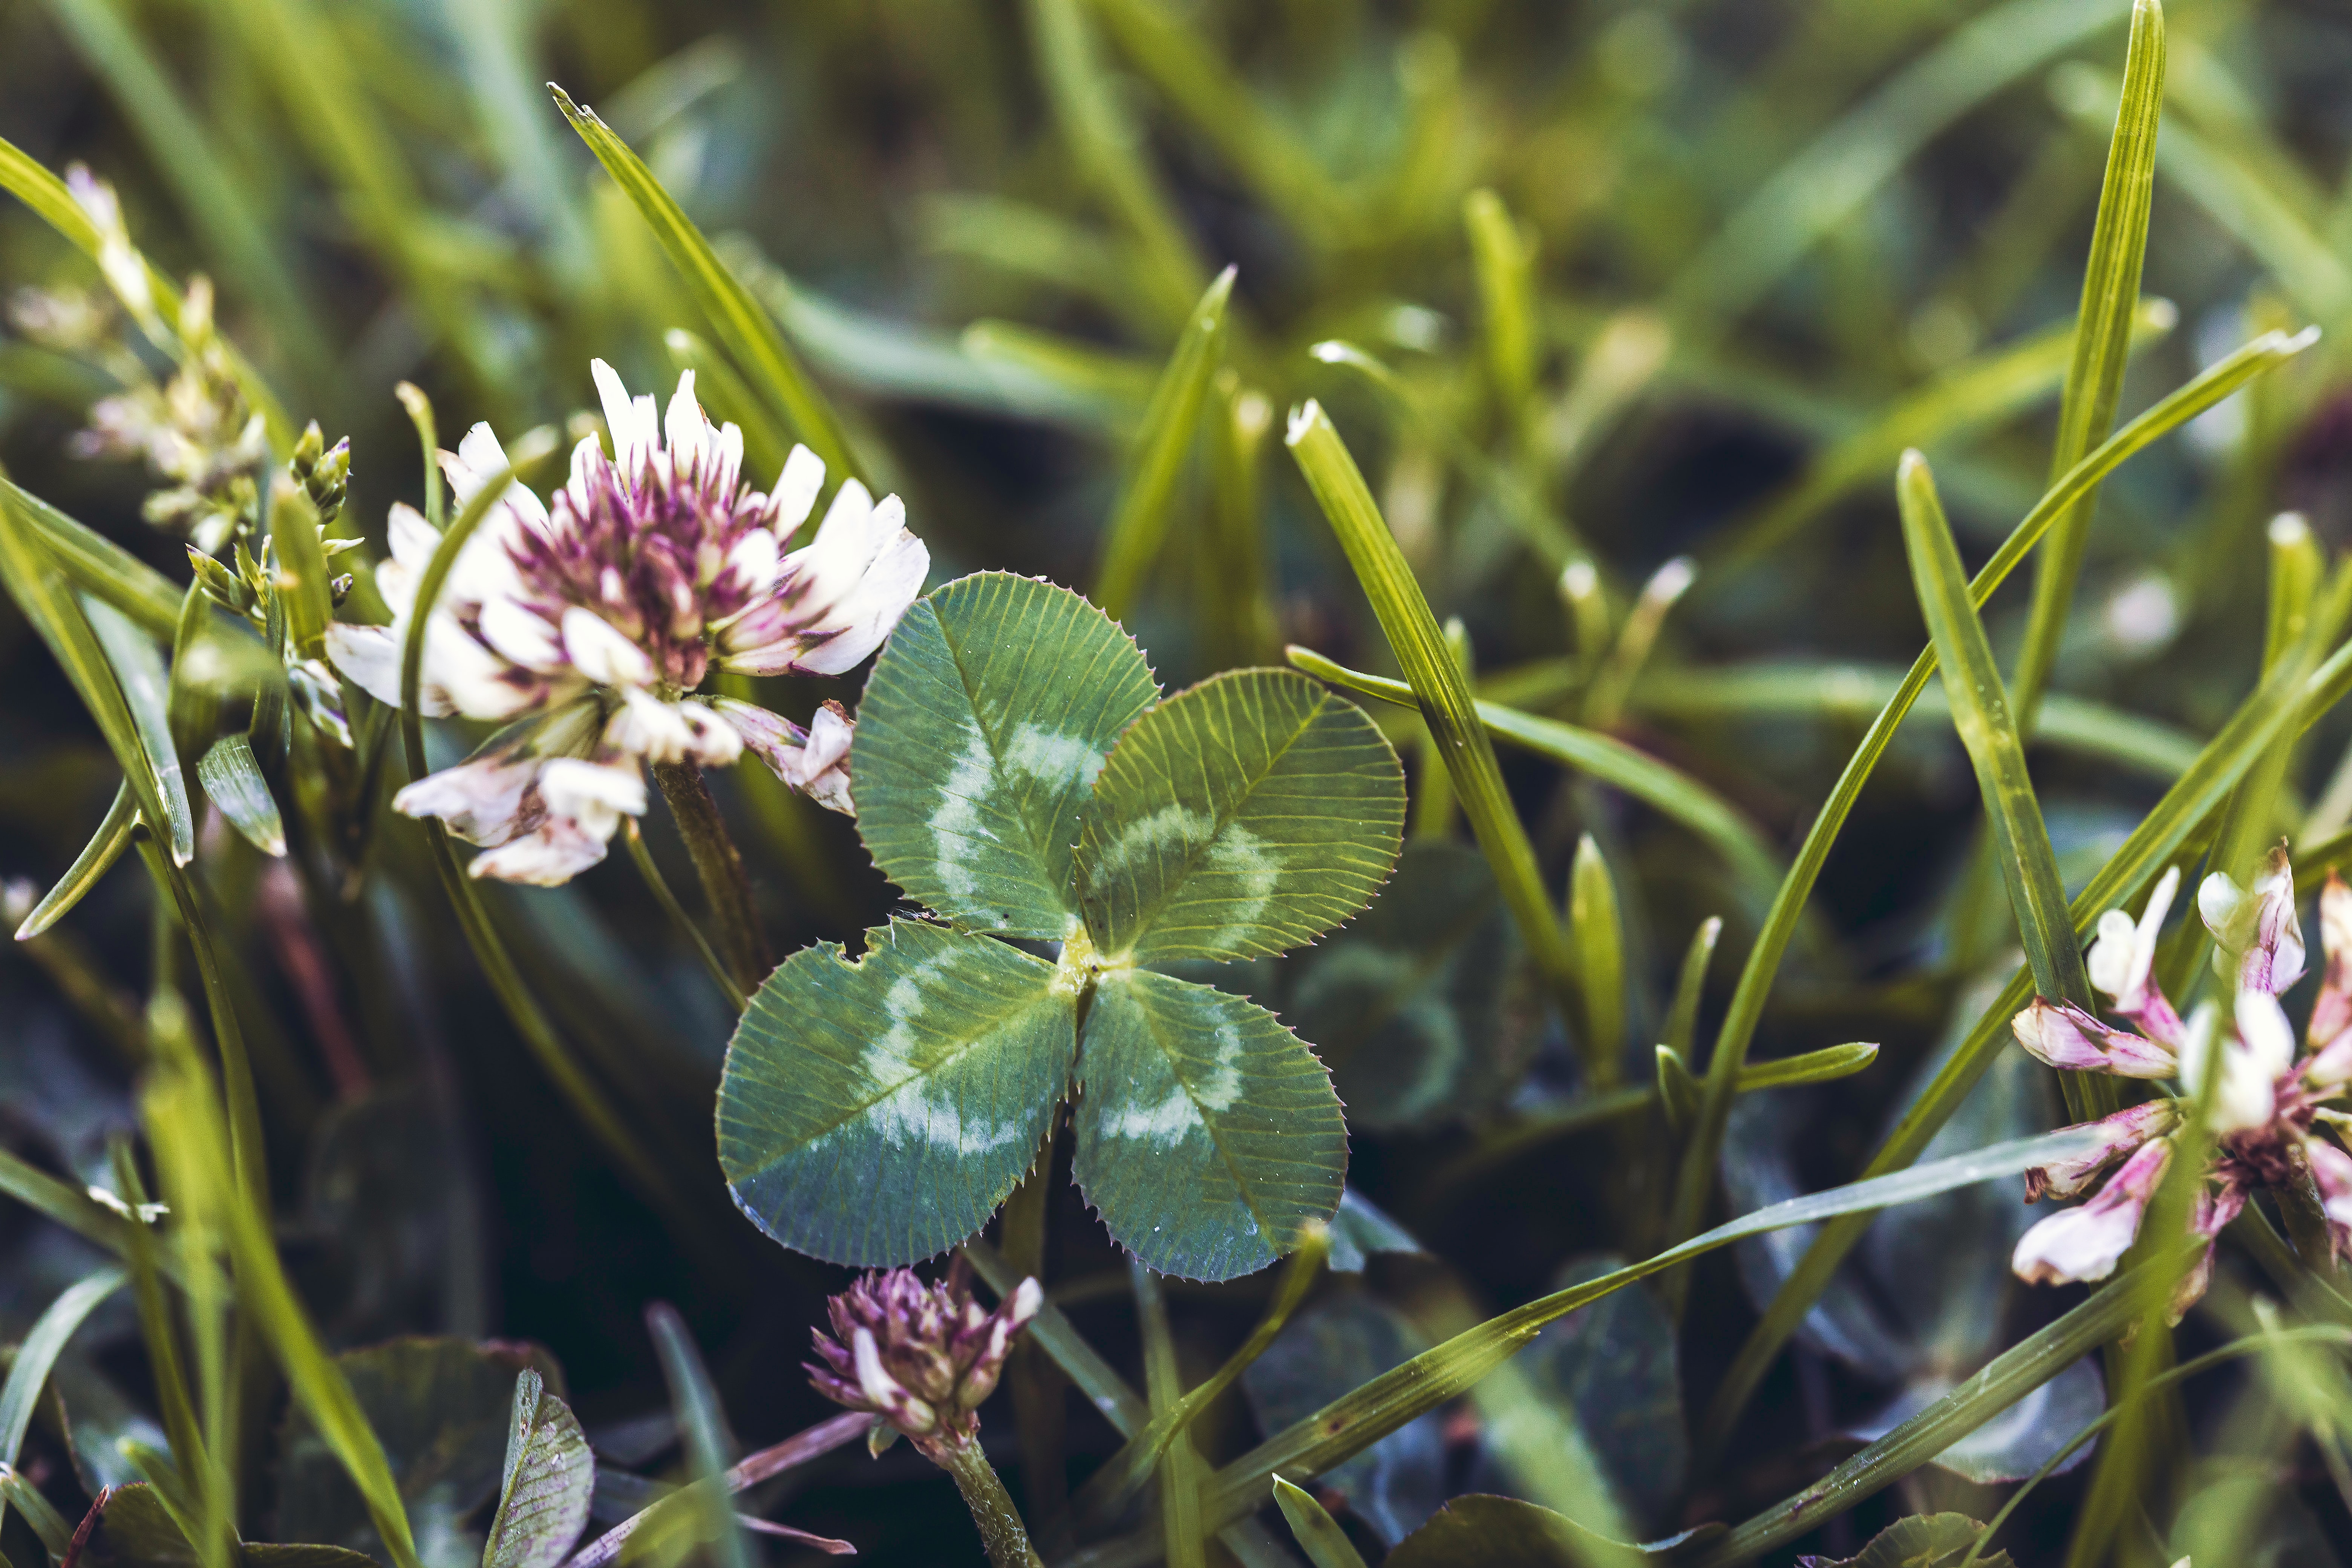 Image of a four leafed clover in a patch of grass surrounded by other flowers and blades of grass.